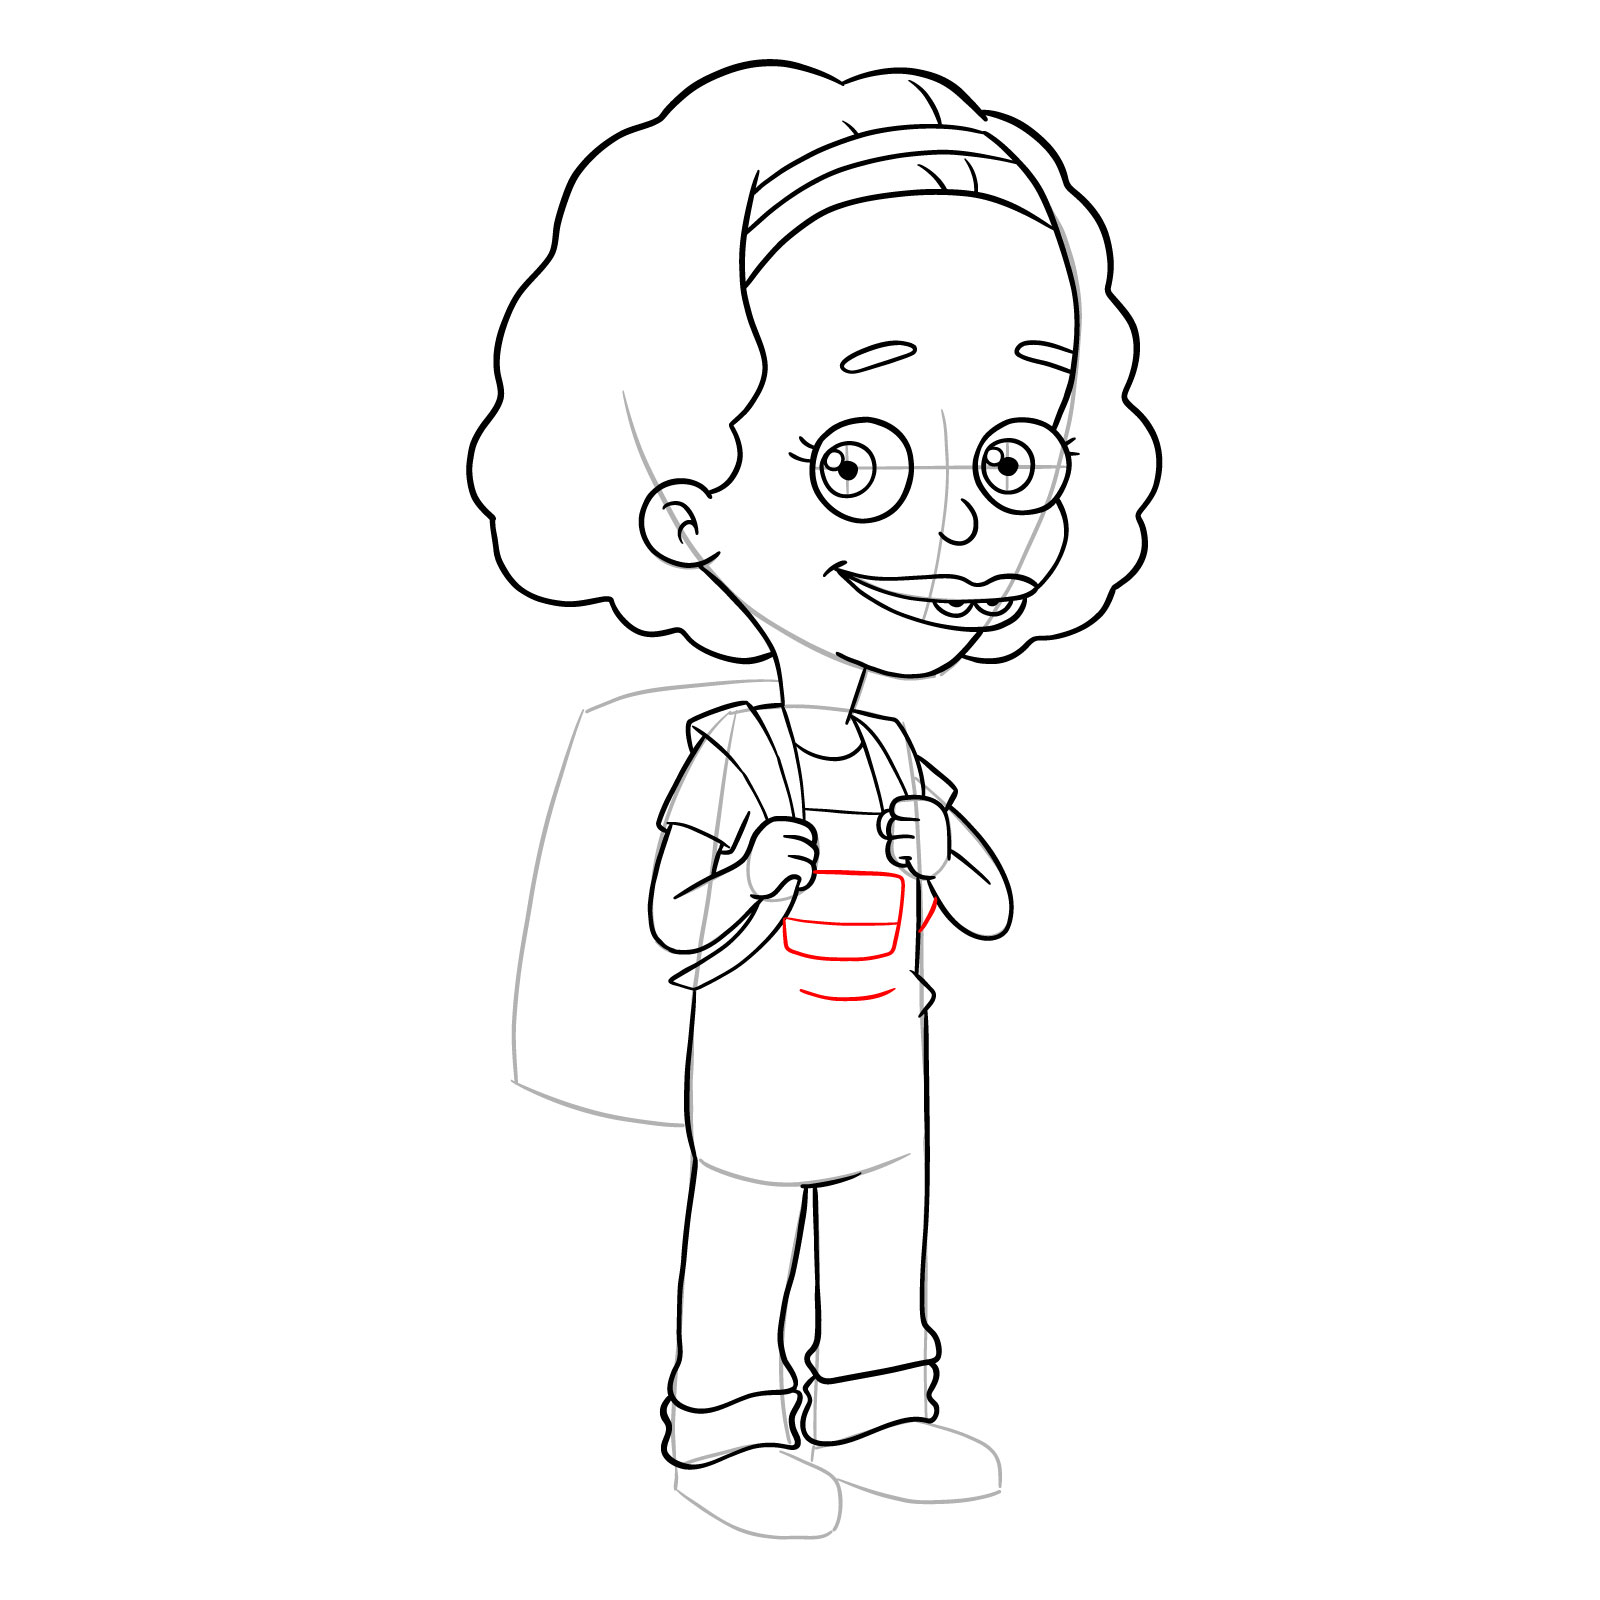 How to draw Missy from Big Mouth - step 24